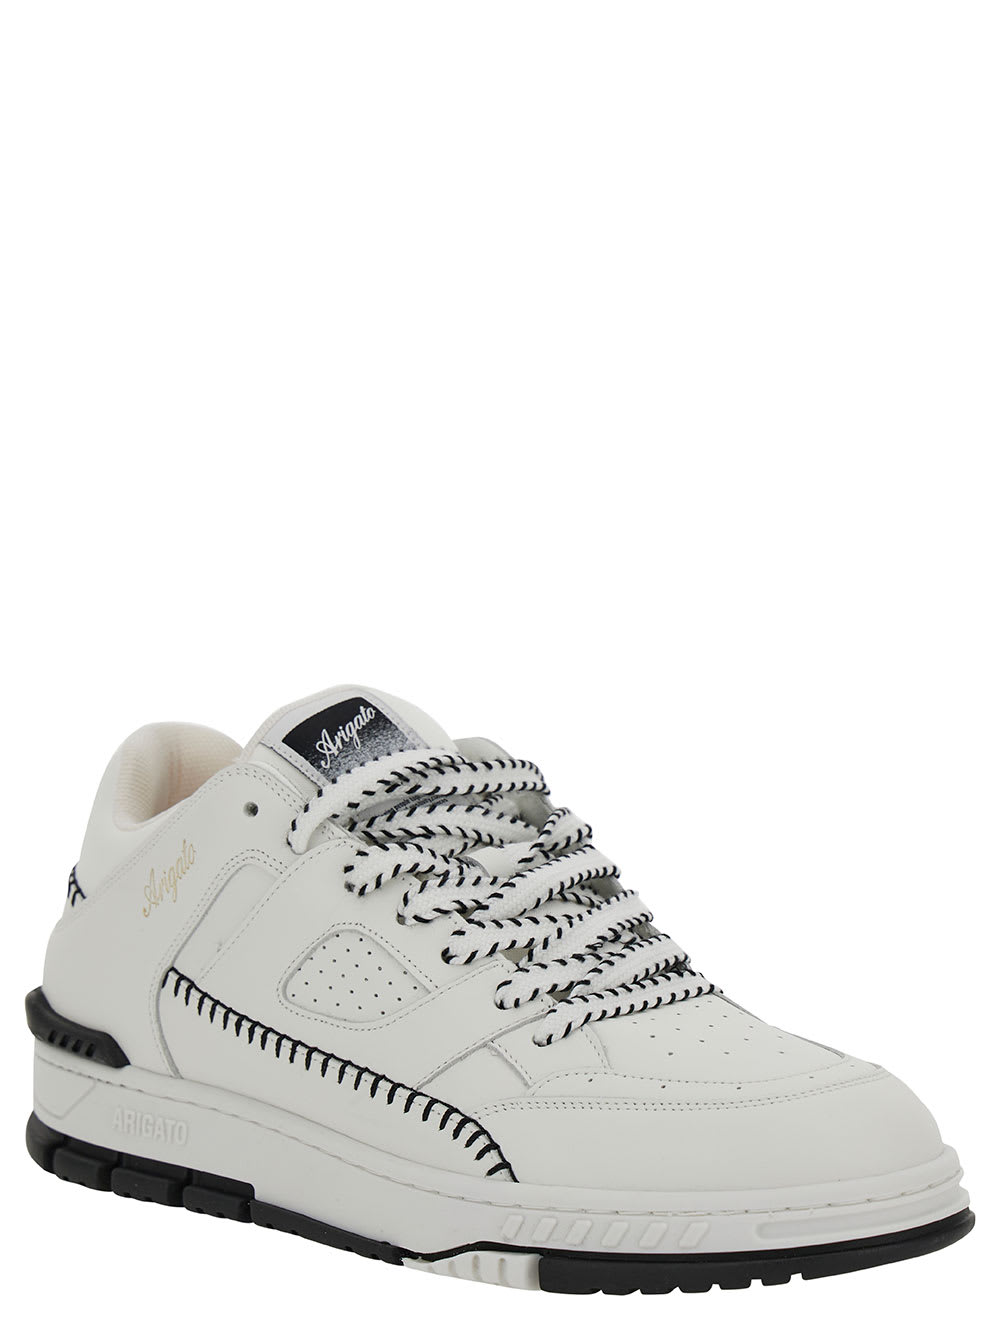 Shop Axel Arigato Area Lo Sneaker Stitch White Low Top Sneakers With Contrasting Stitch Detail In Leather Man In White Black